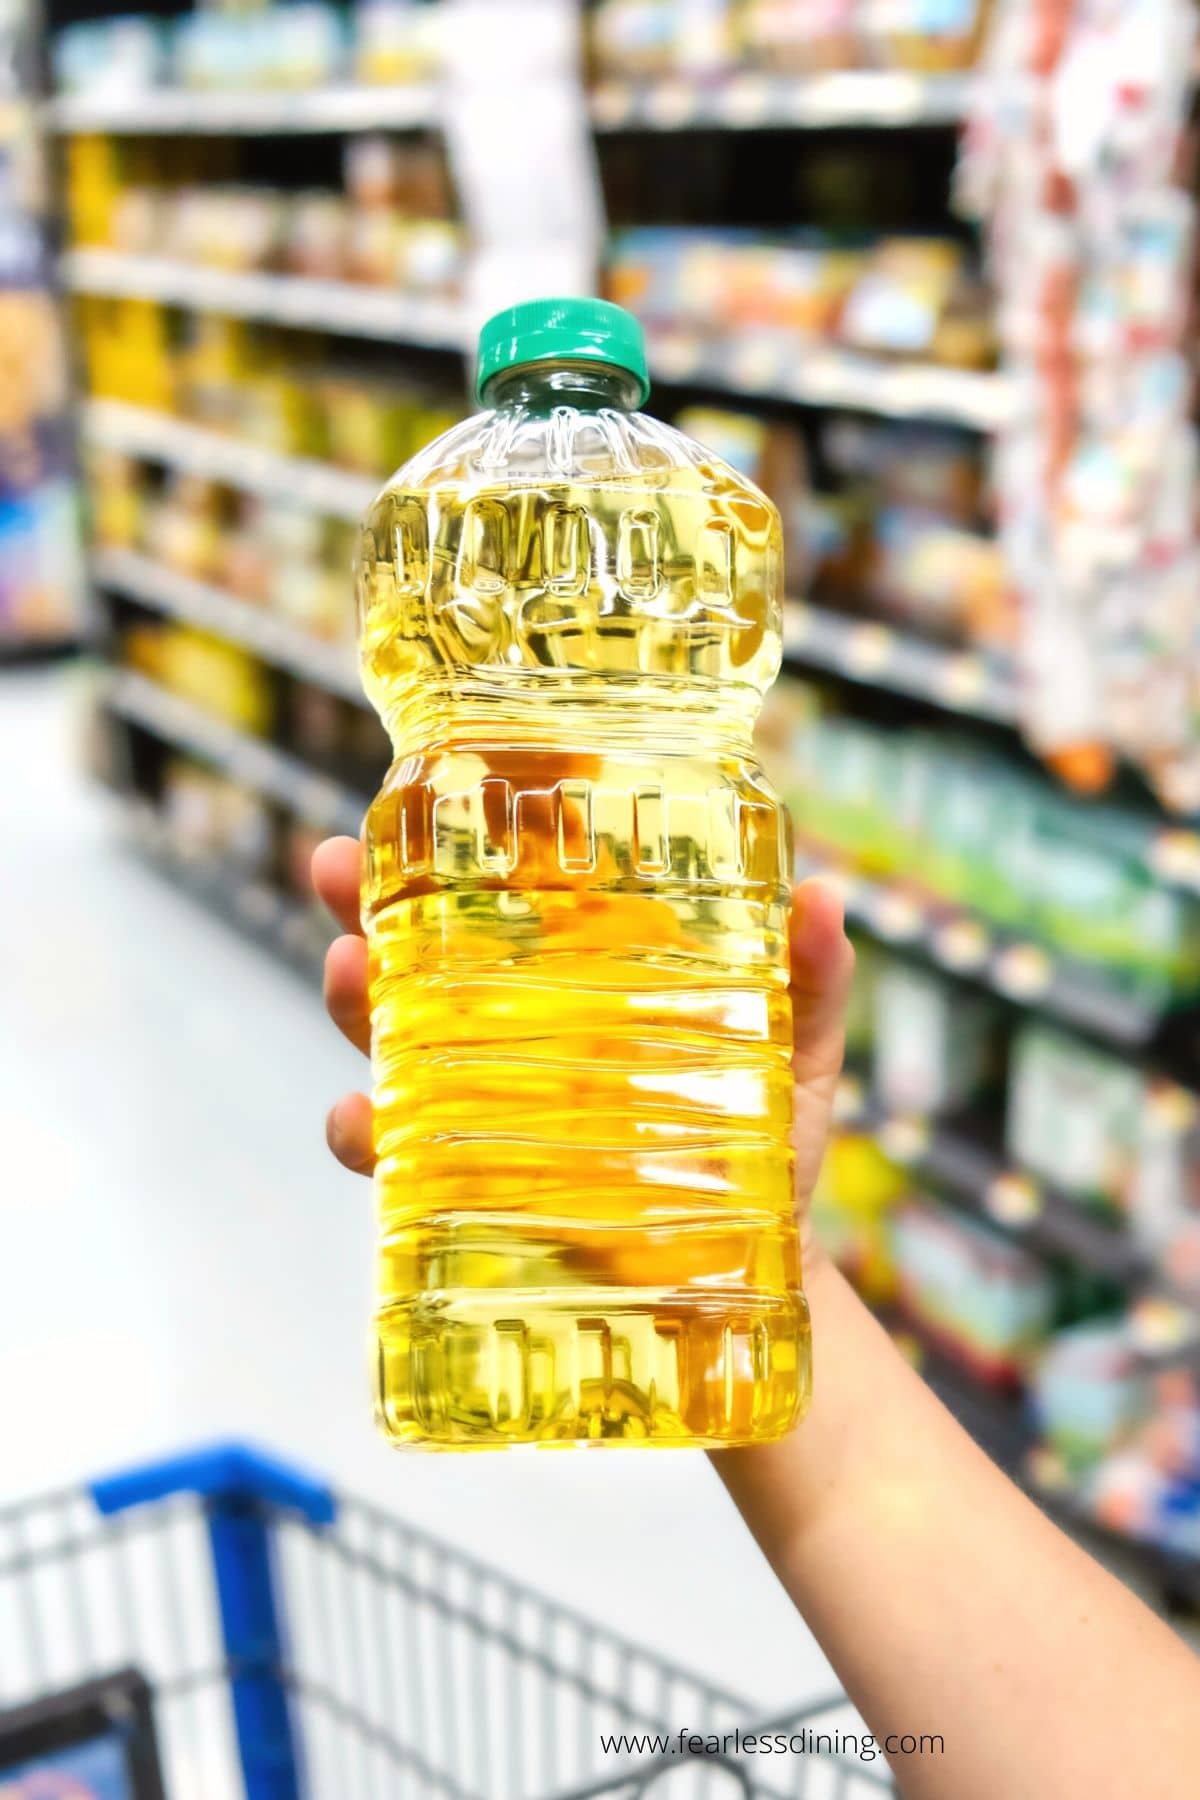 A hand holding up a bottle of cooking oil in the grocery store.